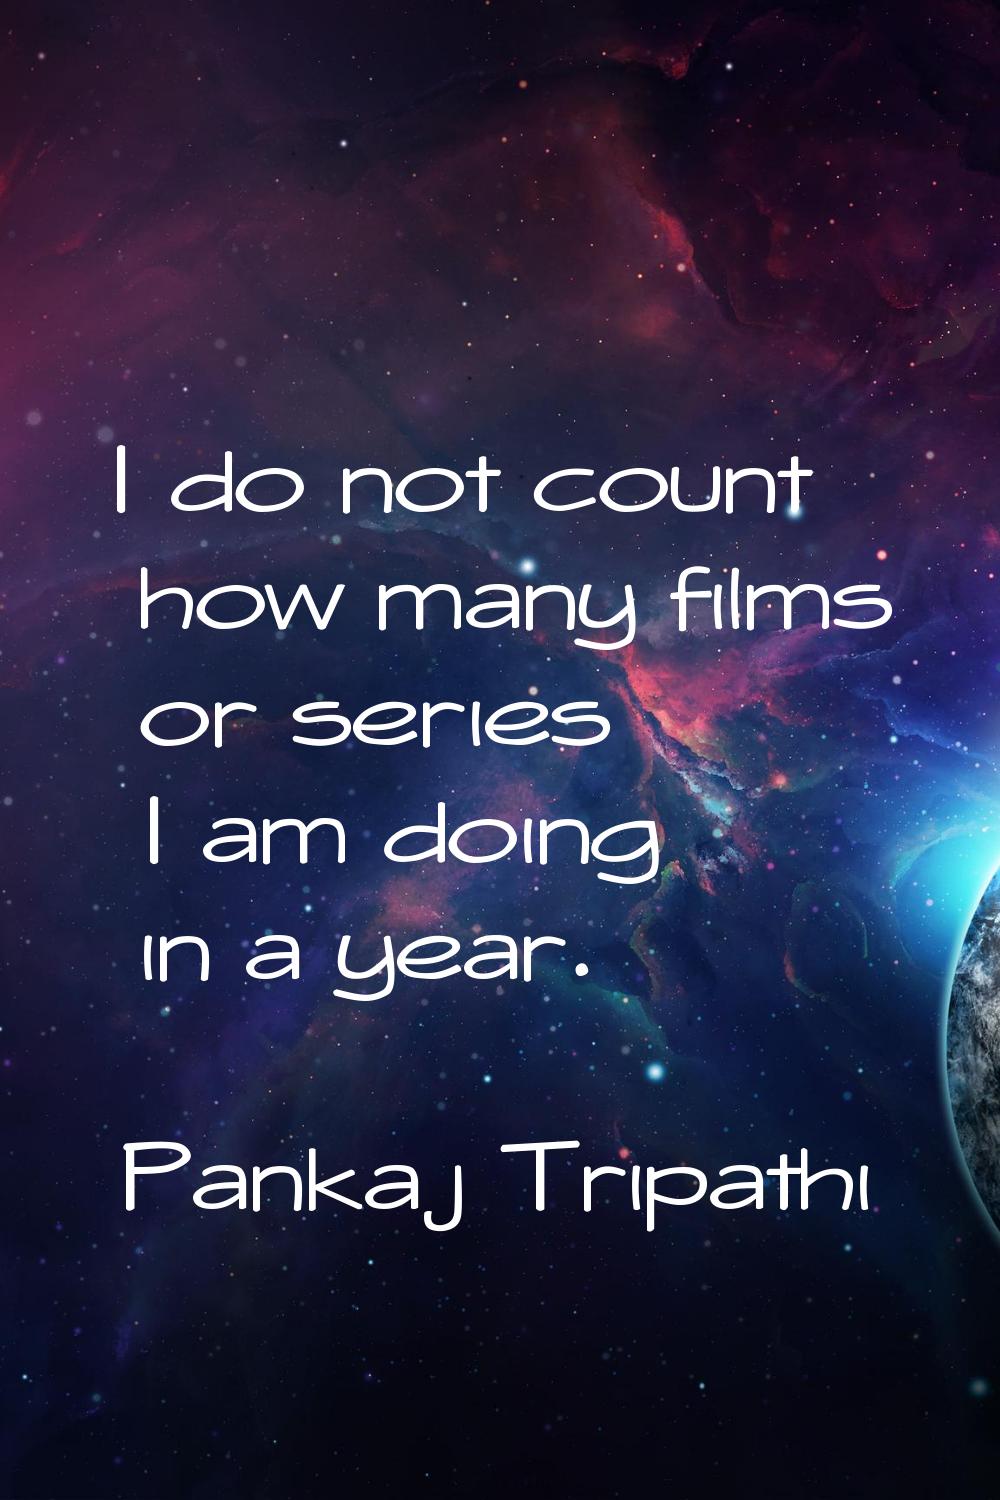 I do not count how many films or series I am doing in a year.